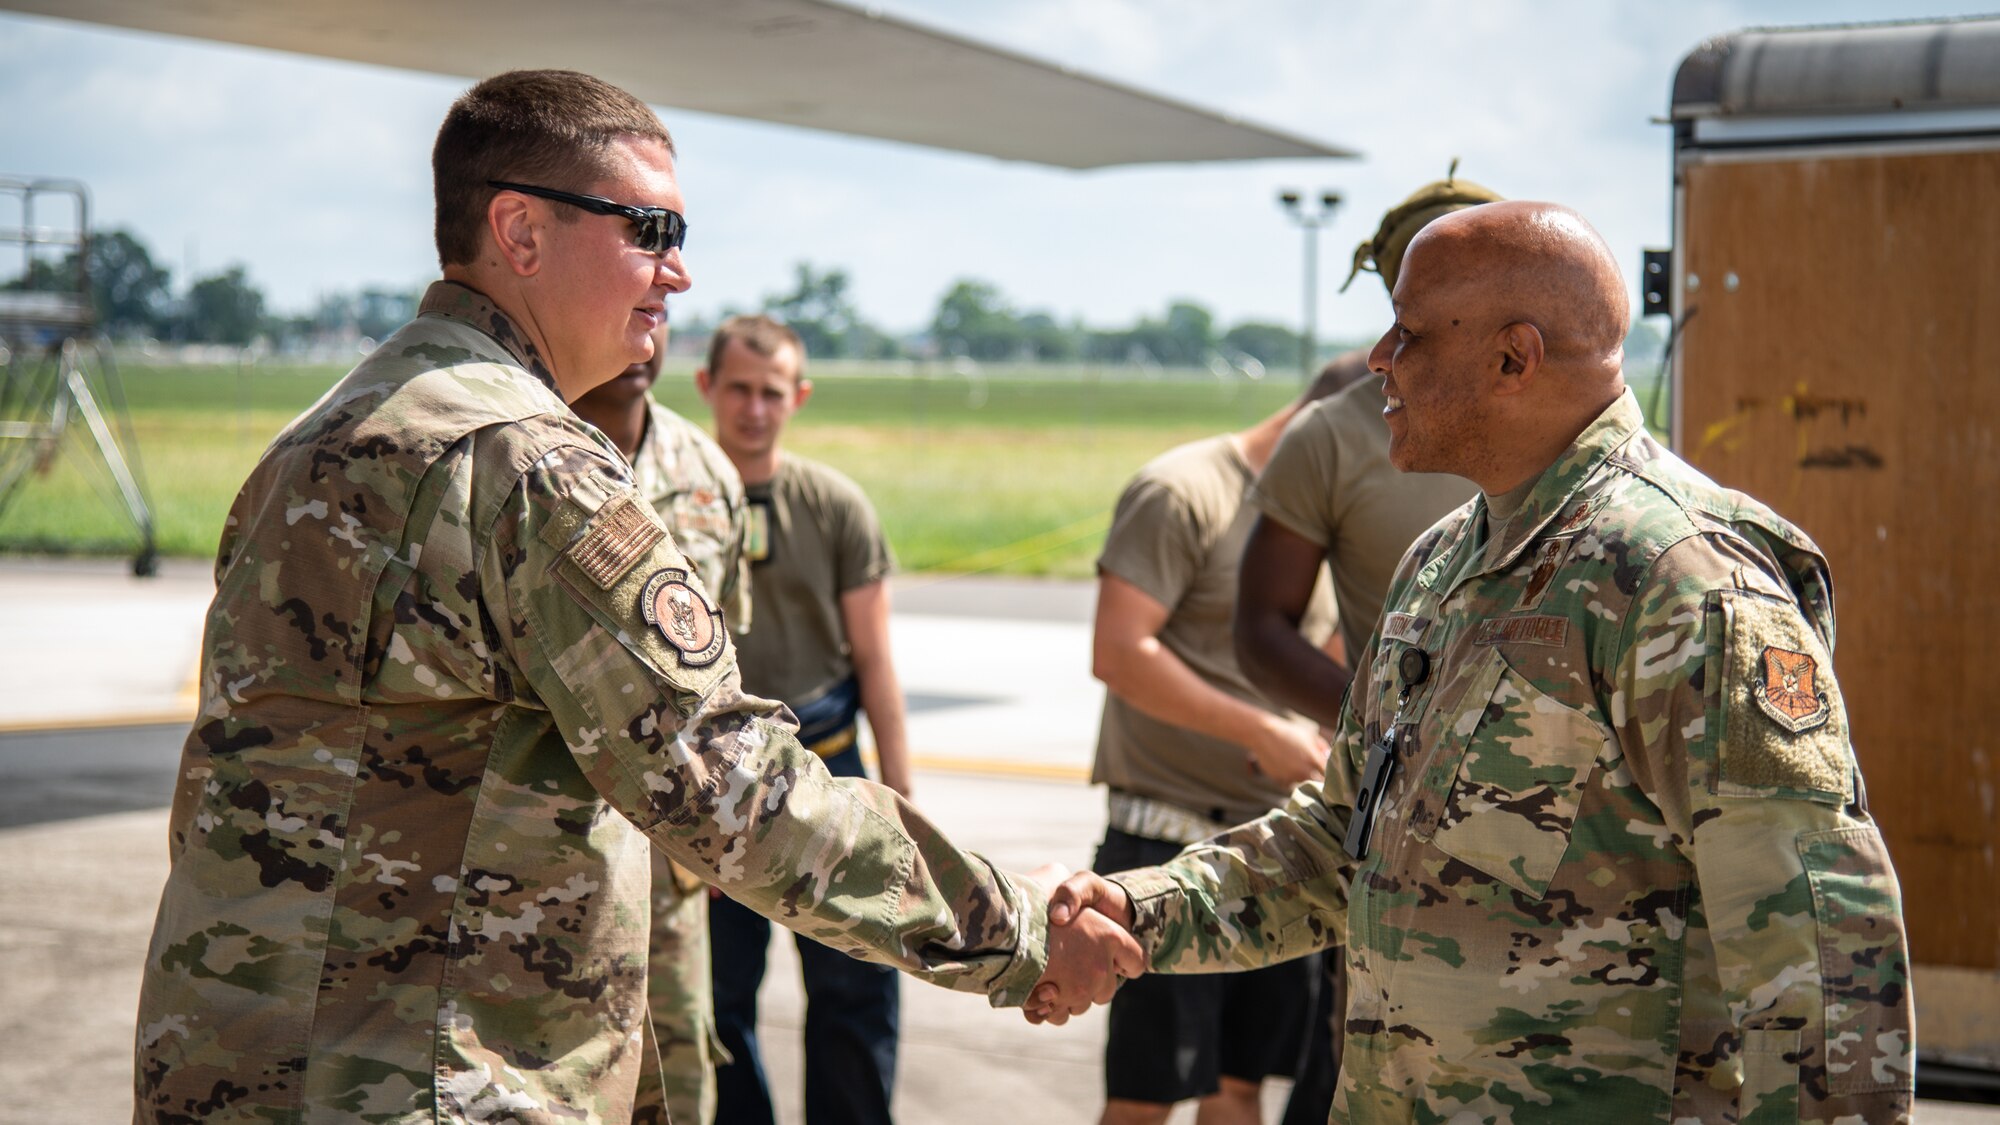 Lt. Gen. Anthony Cotton, Air Force Global Strike Command deputy commander, right, greets Master Sgt. Joshua Gallagher, 9th Aircraft Maintenance Unit production superintendent, left, before touring a B-1B Lancer at Barksdale Air Force Base, Louisiana, July 16, 2021.